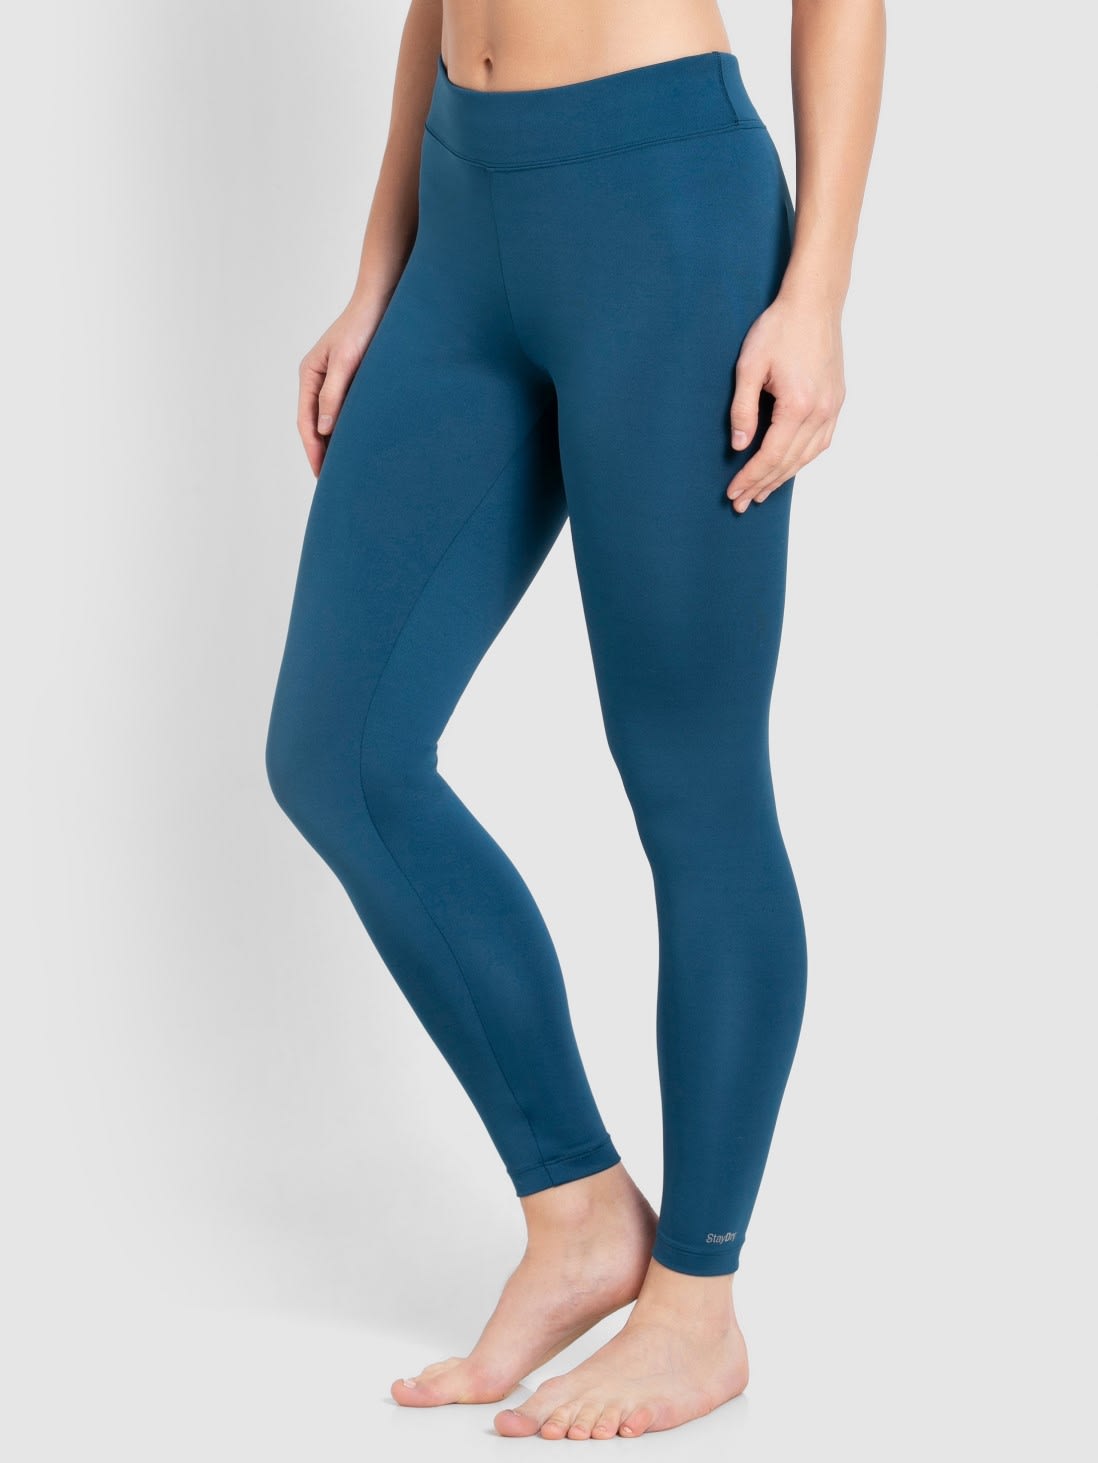 scicent Womens Sports Tights Leggings with Pockets India | Ubuy